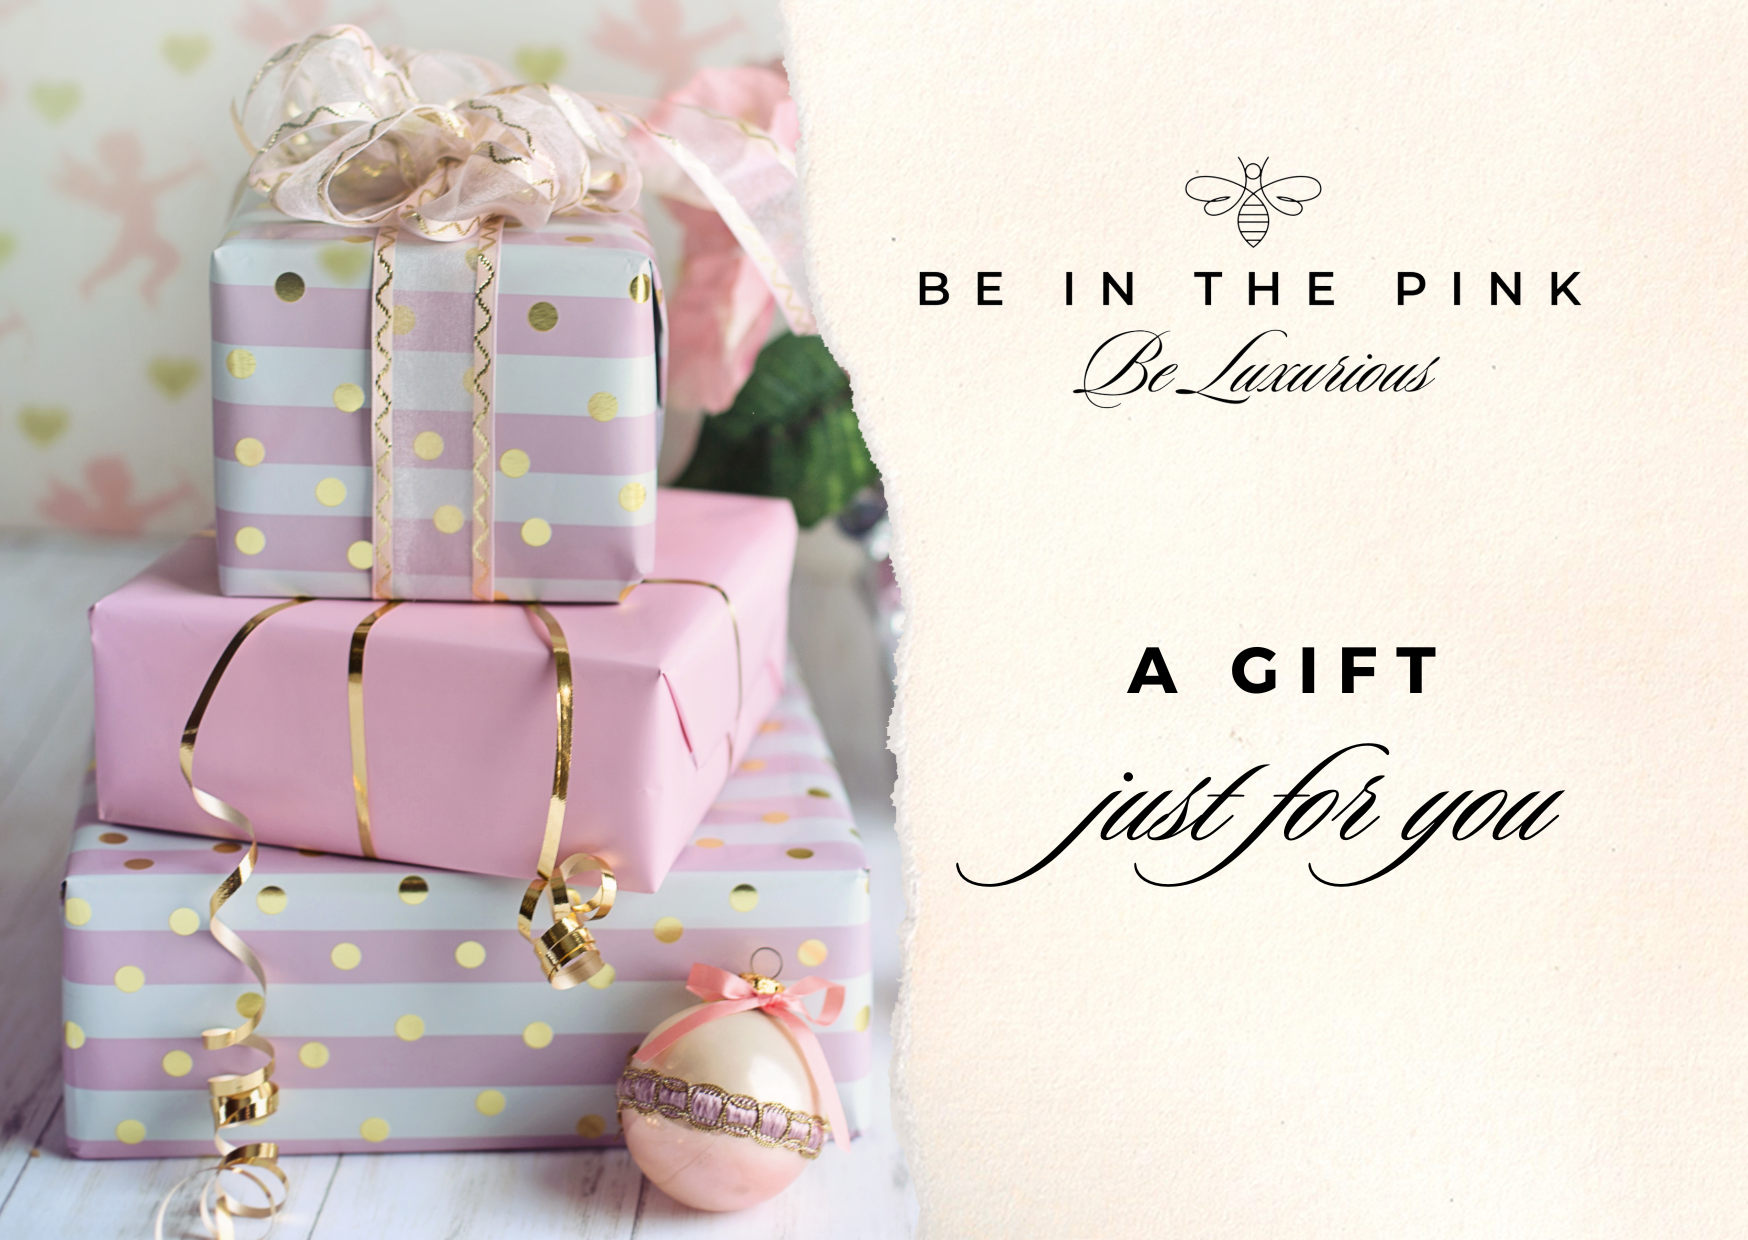 Be in the Pink Gift Card